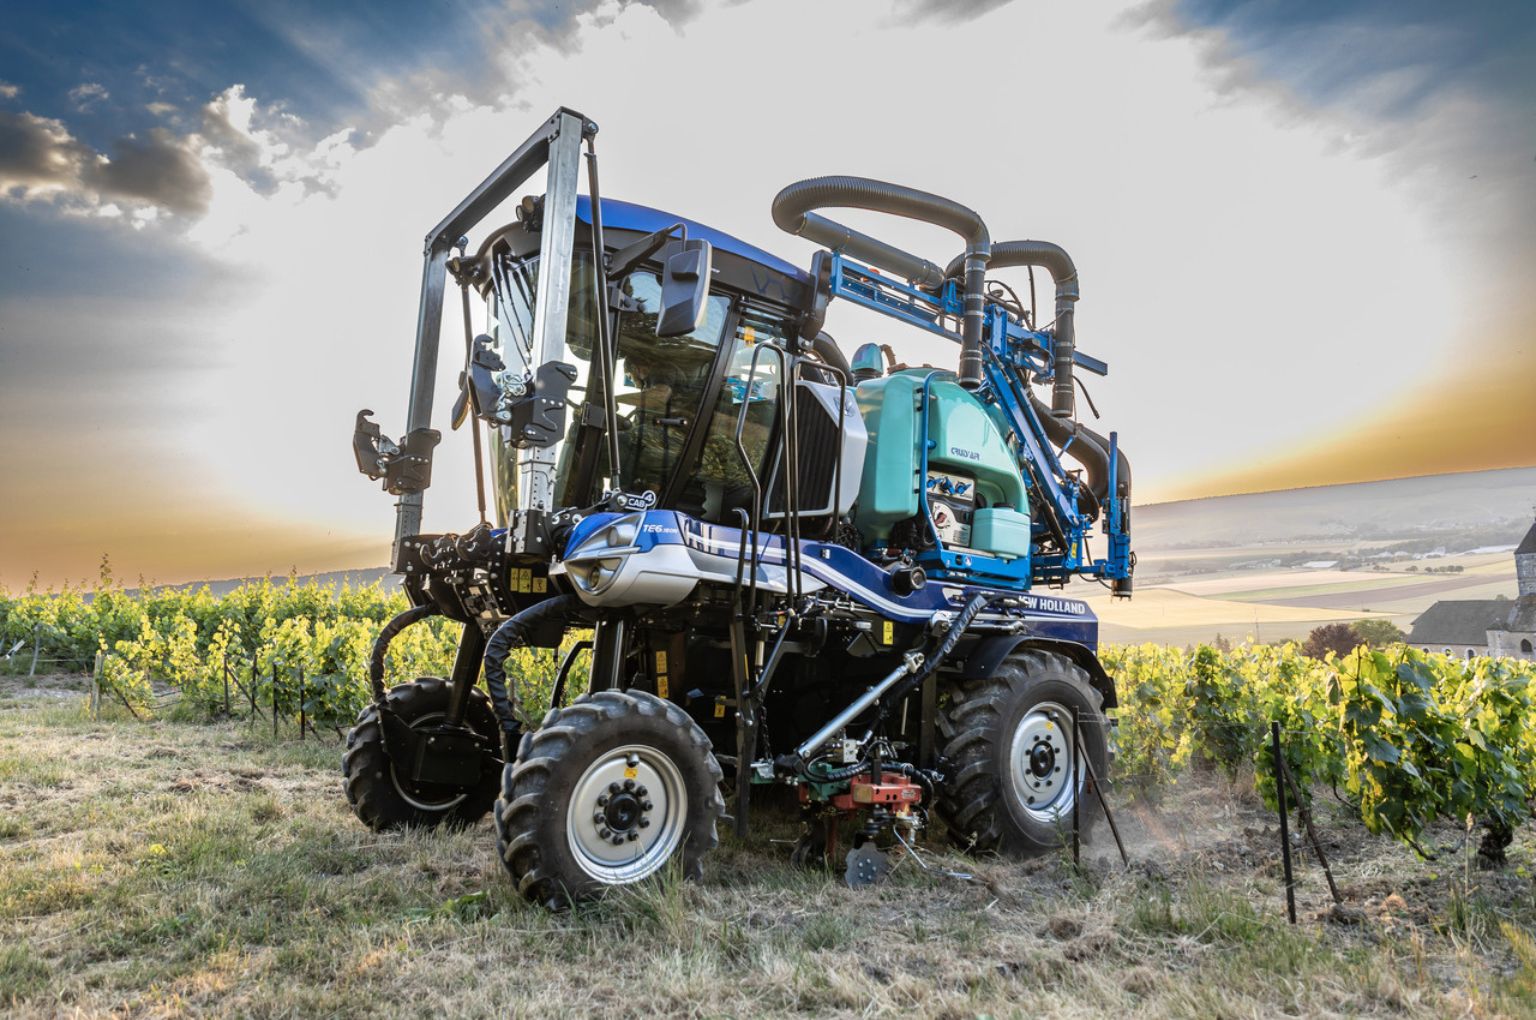 New Holland straddle tractor is reality